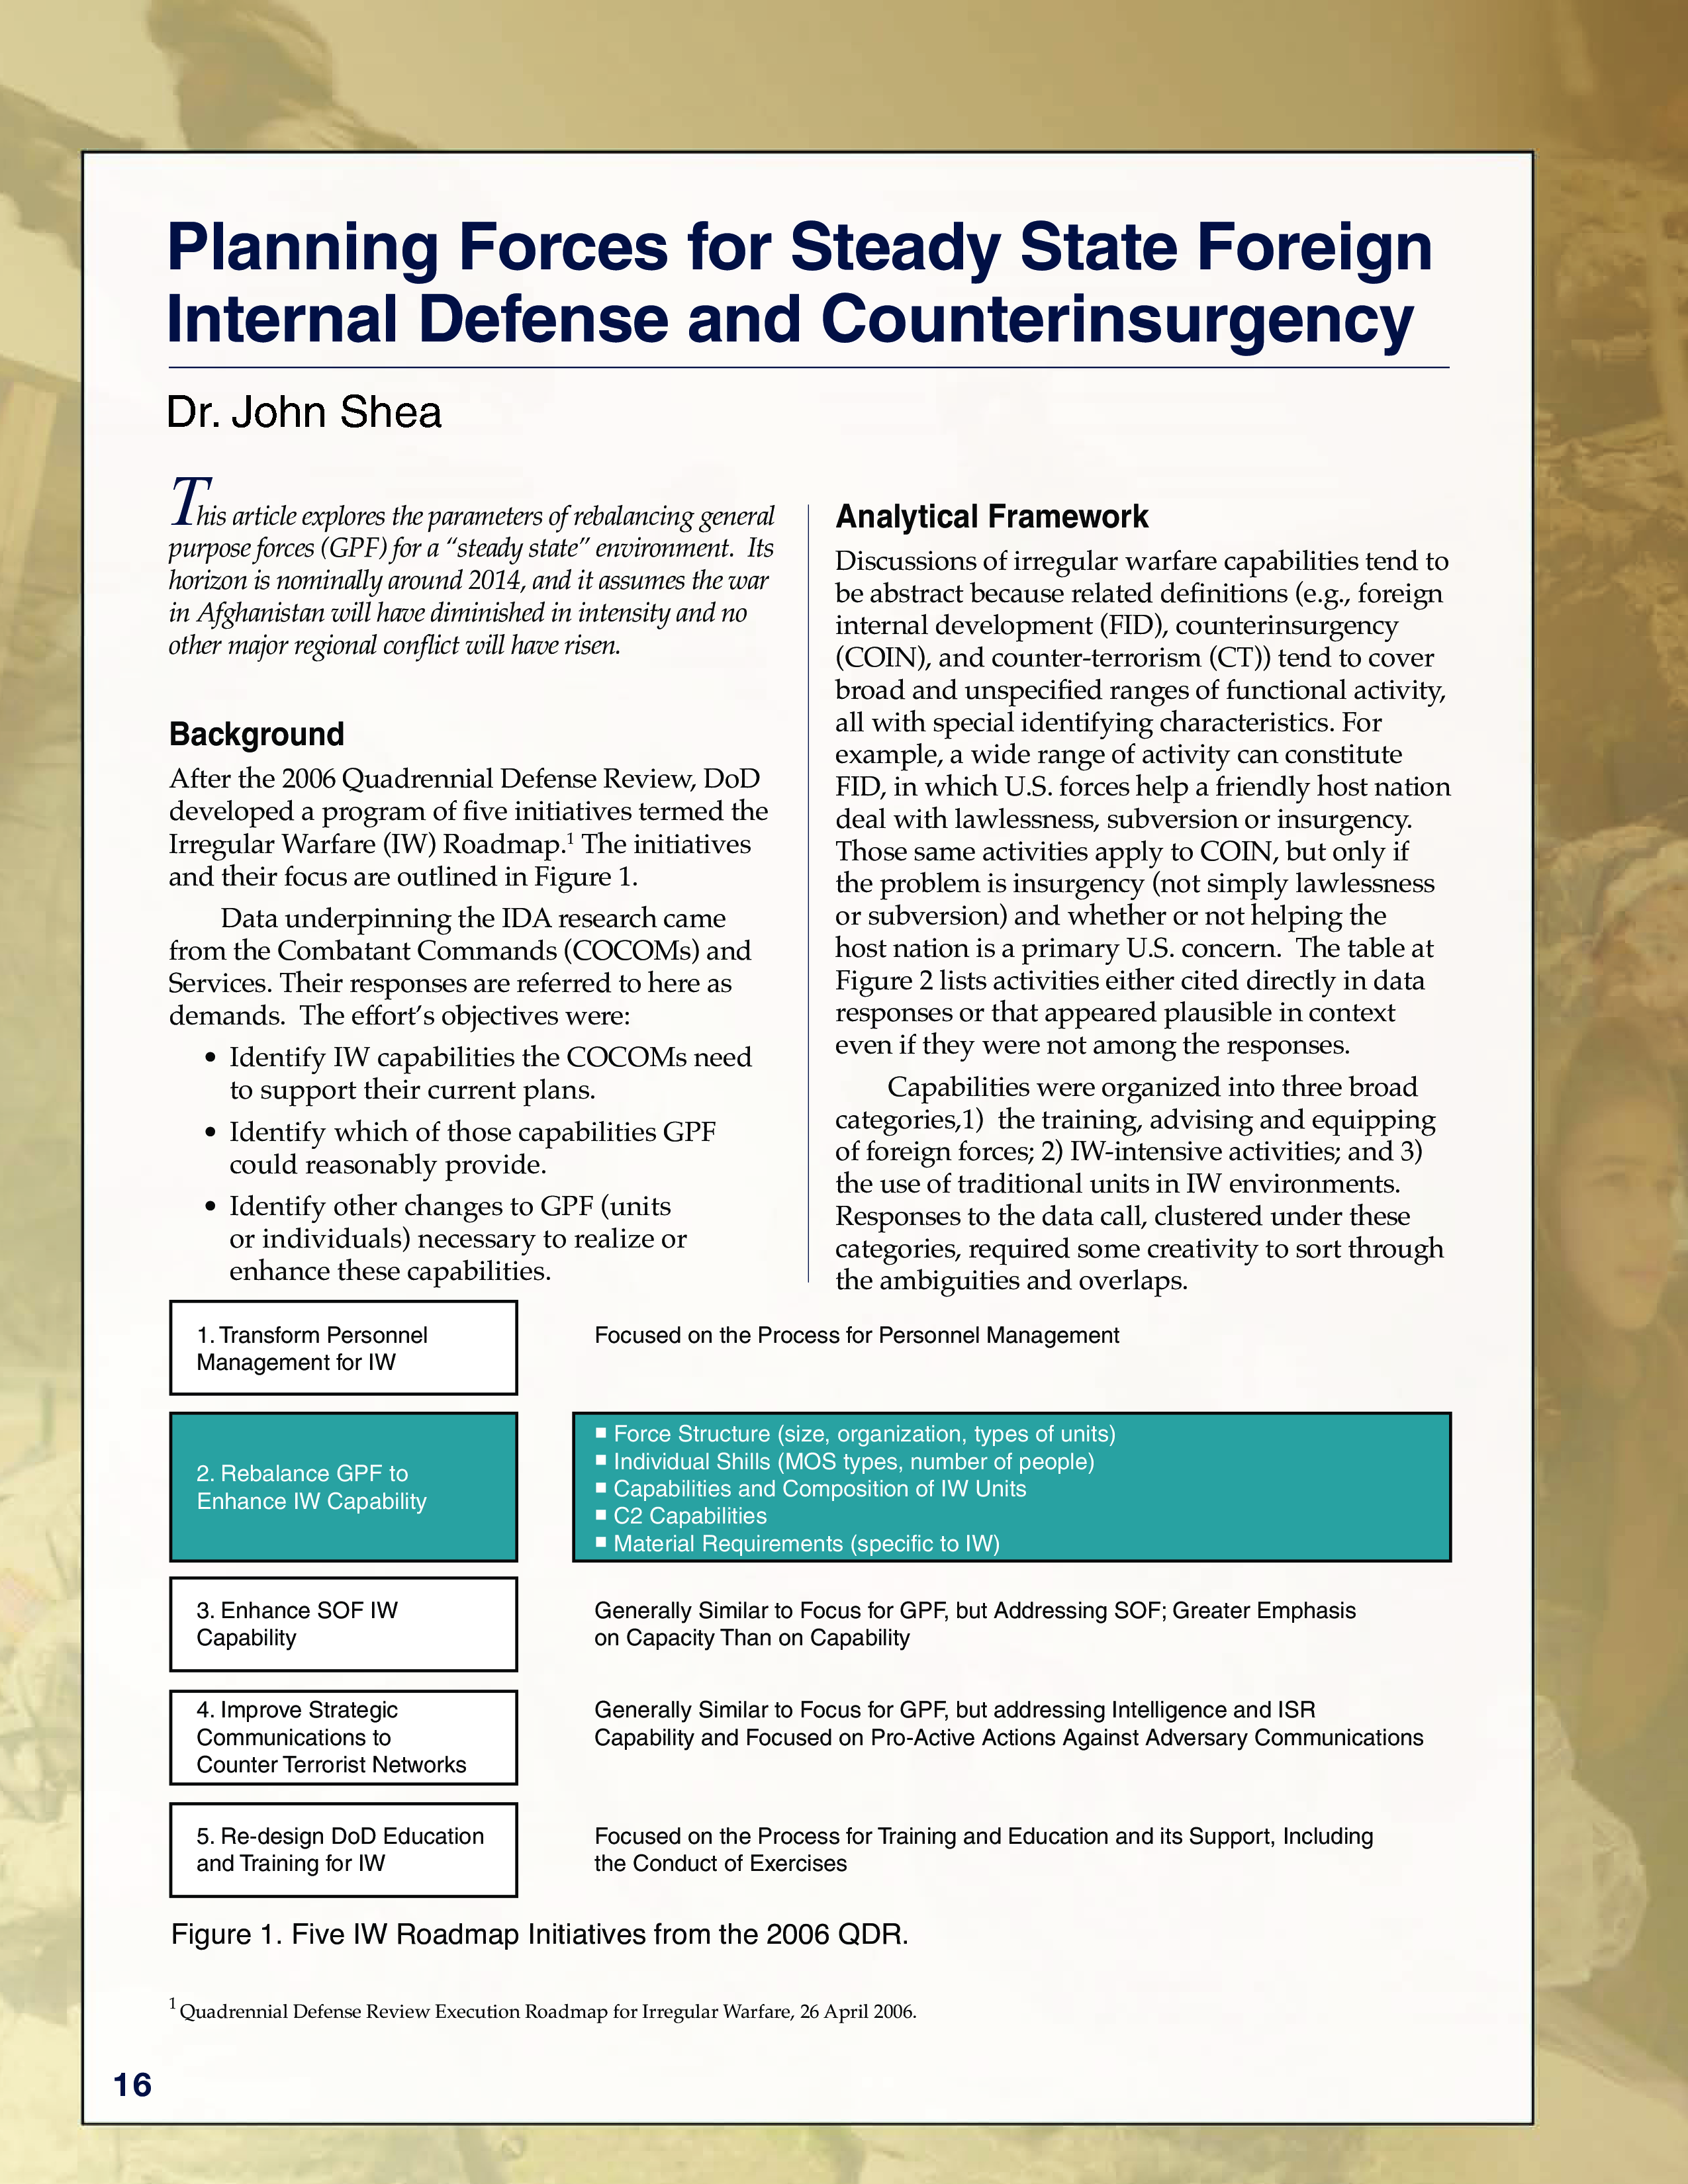 Planning Forces for Steady State Foreign Internal Defense and Sounterinsurgency